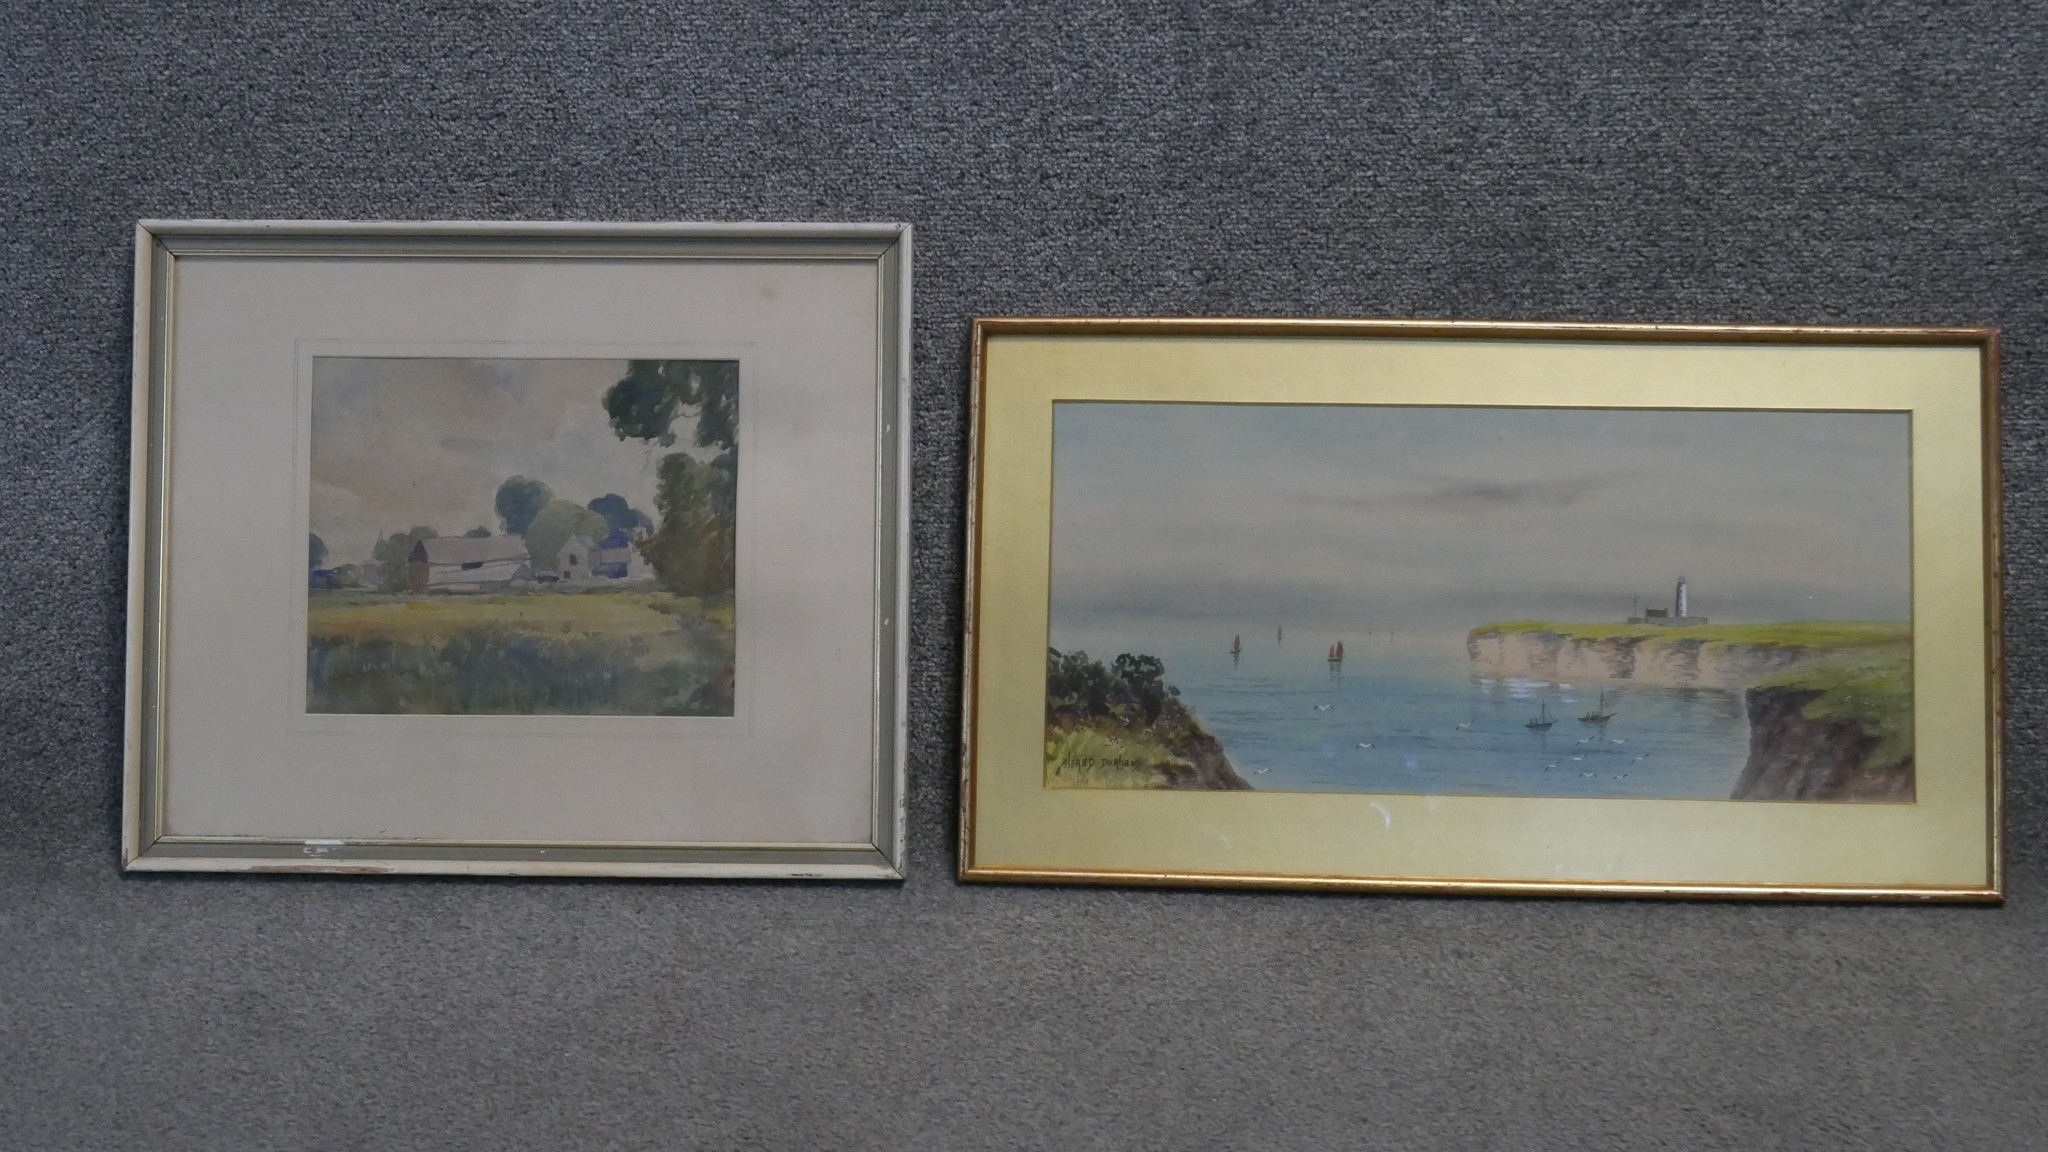 Two framed and glazed watercolours, one depicting Flamborough Head on the Yorkshire Coast, 1922.